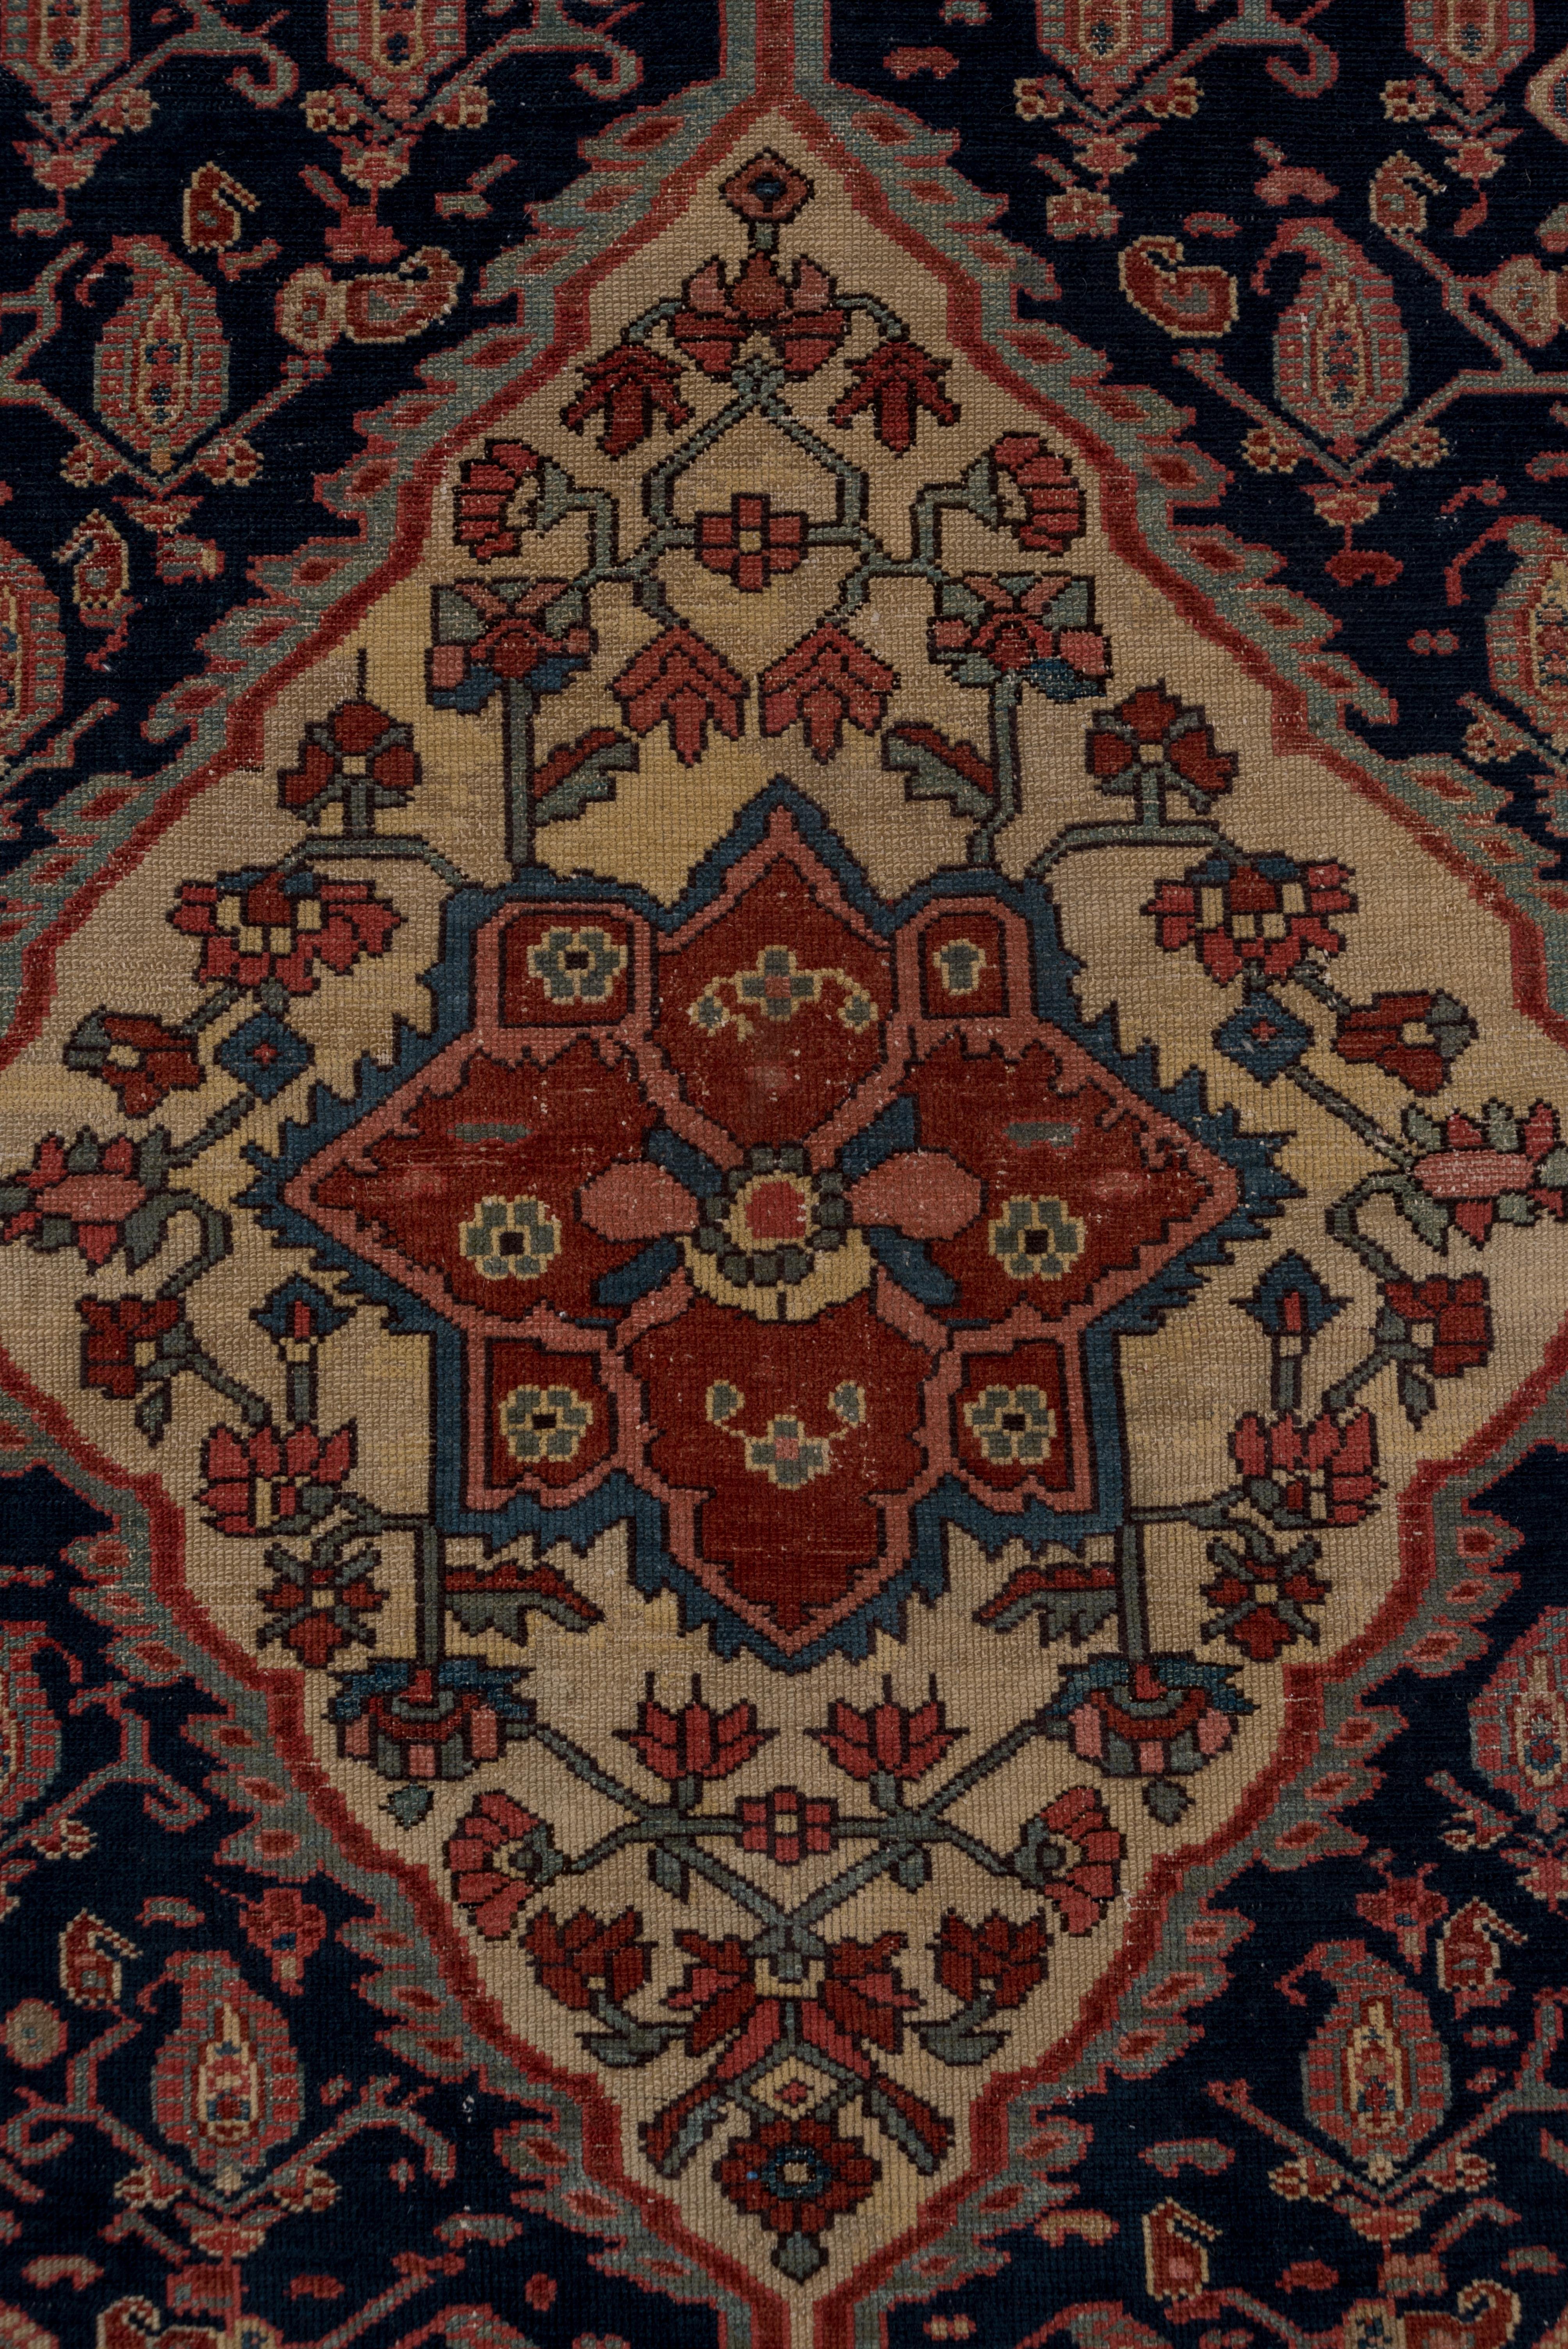 1900s Antique Persian Mishan Malayer Rug, Rose, Navy & Ivory Field, Blue Borders In Good Condition For Sale In New York, NY